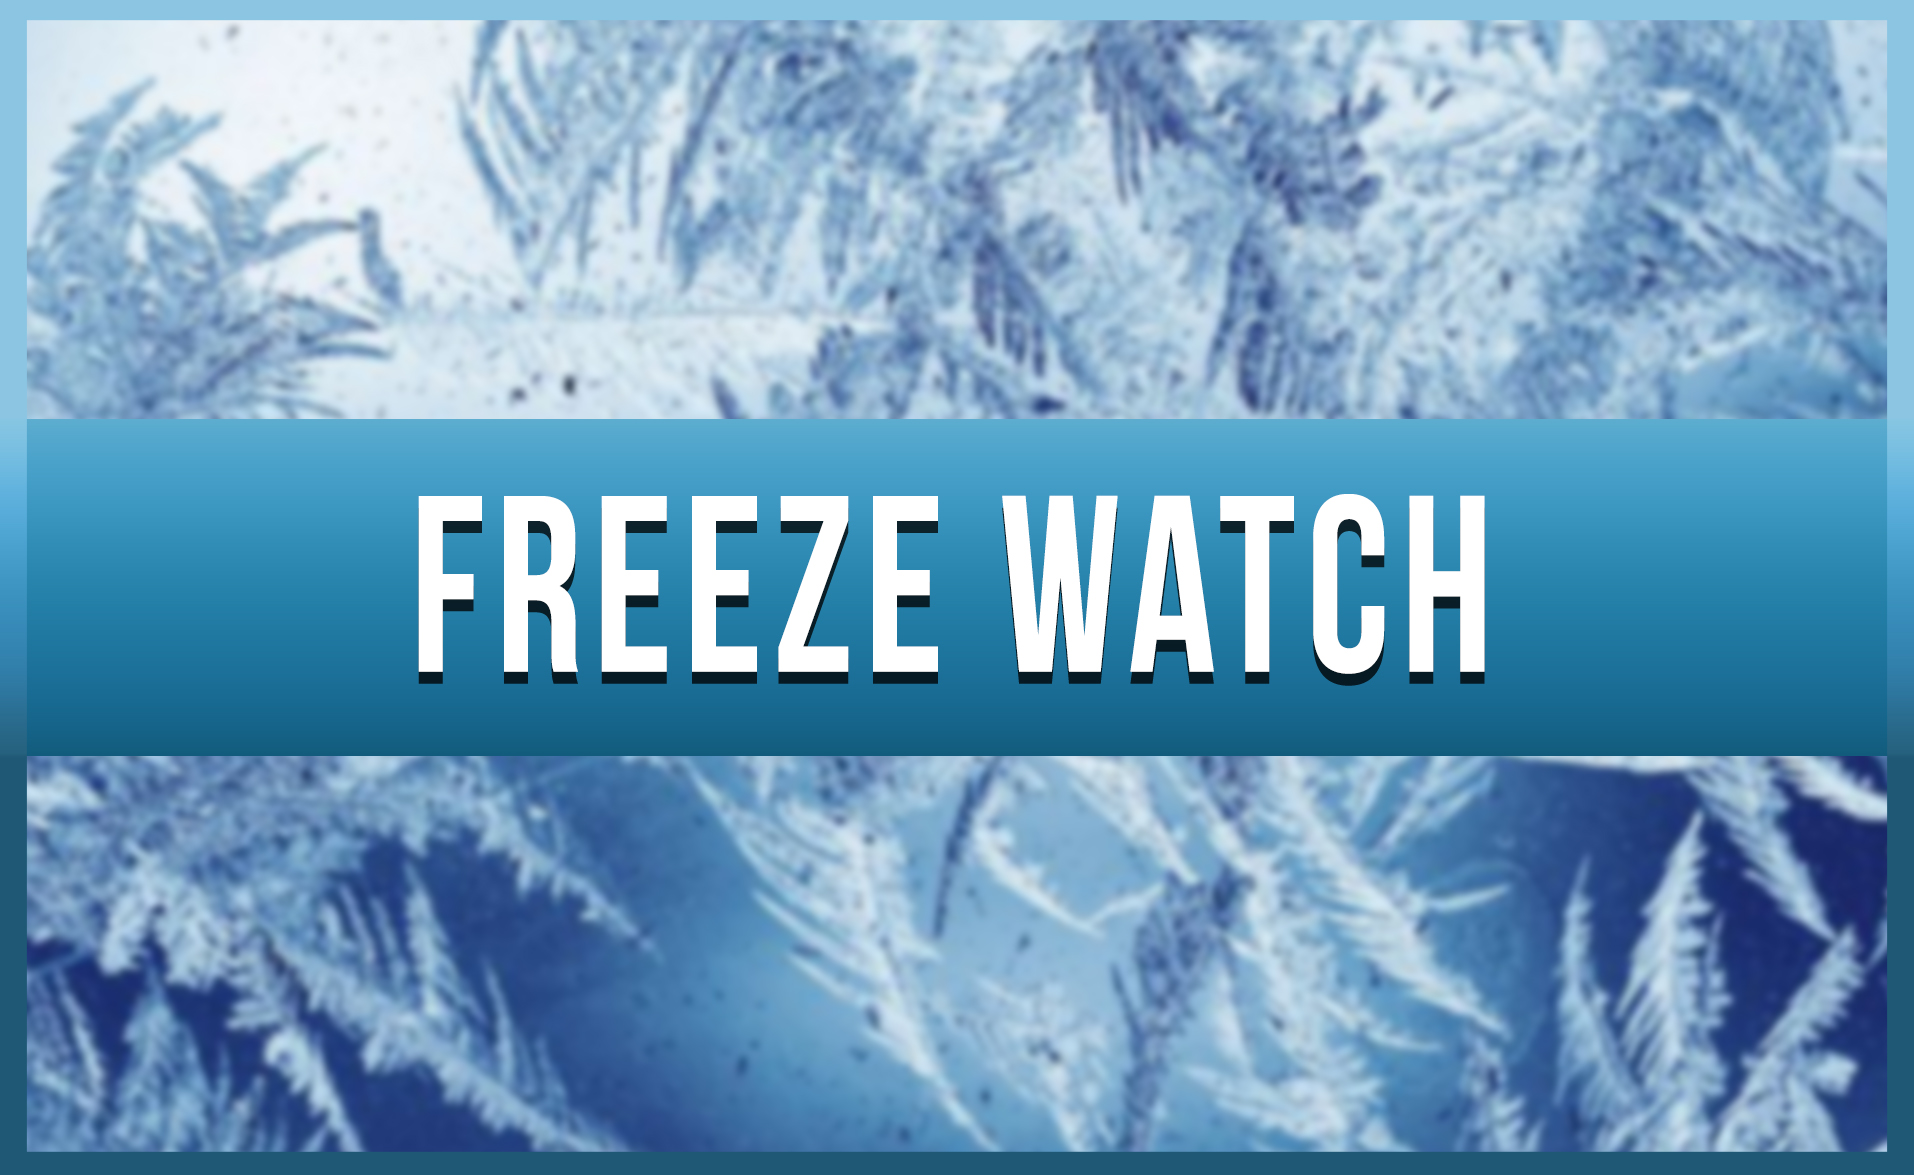 You are currently viewing *** FREEZE WATCH IN EFFECT ****